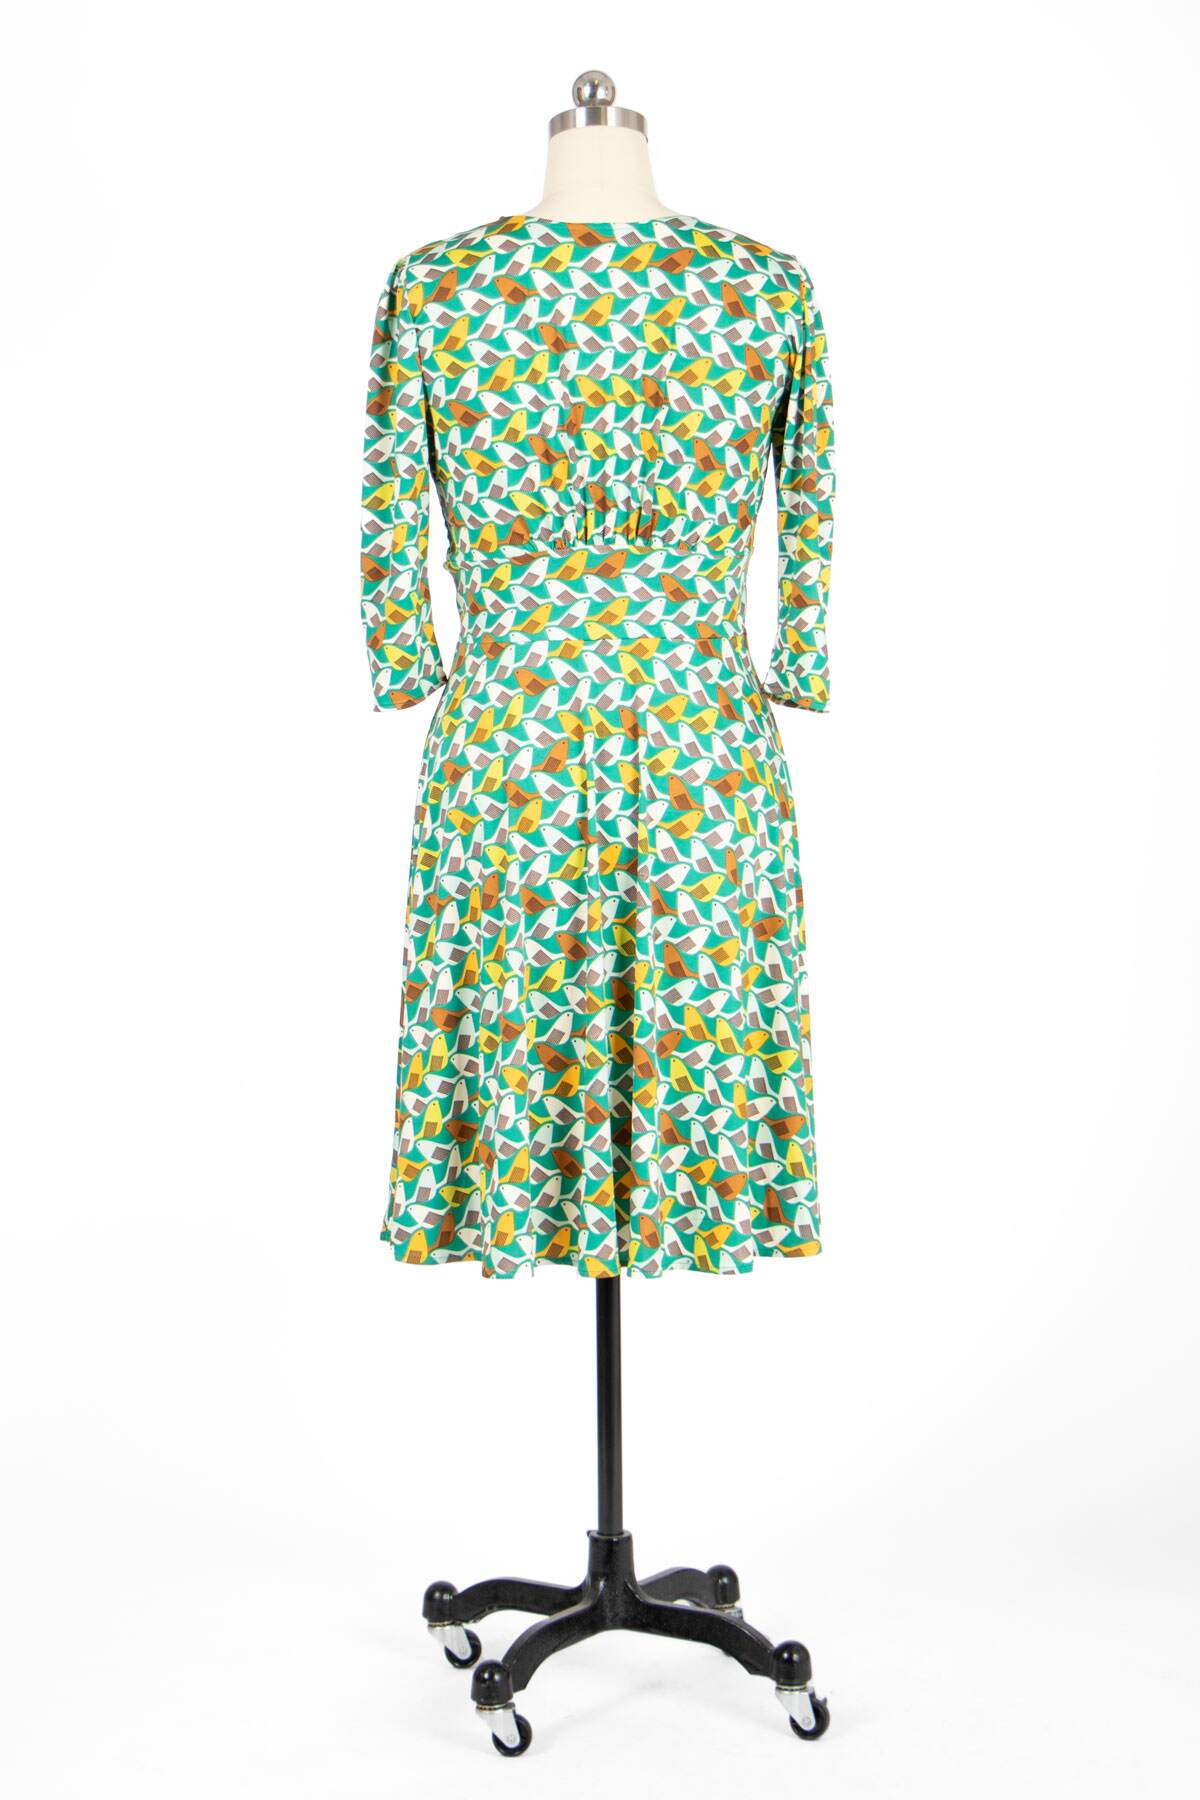 Load image into Gallery viewer, Megan Dress - Follow The Finches
